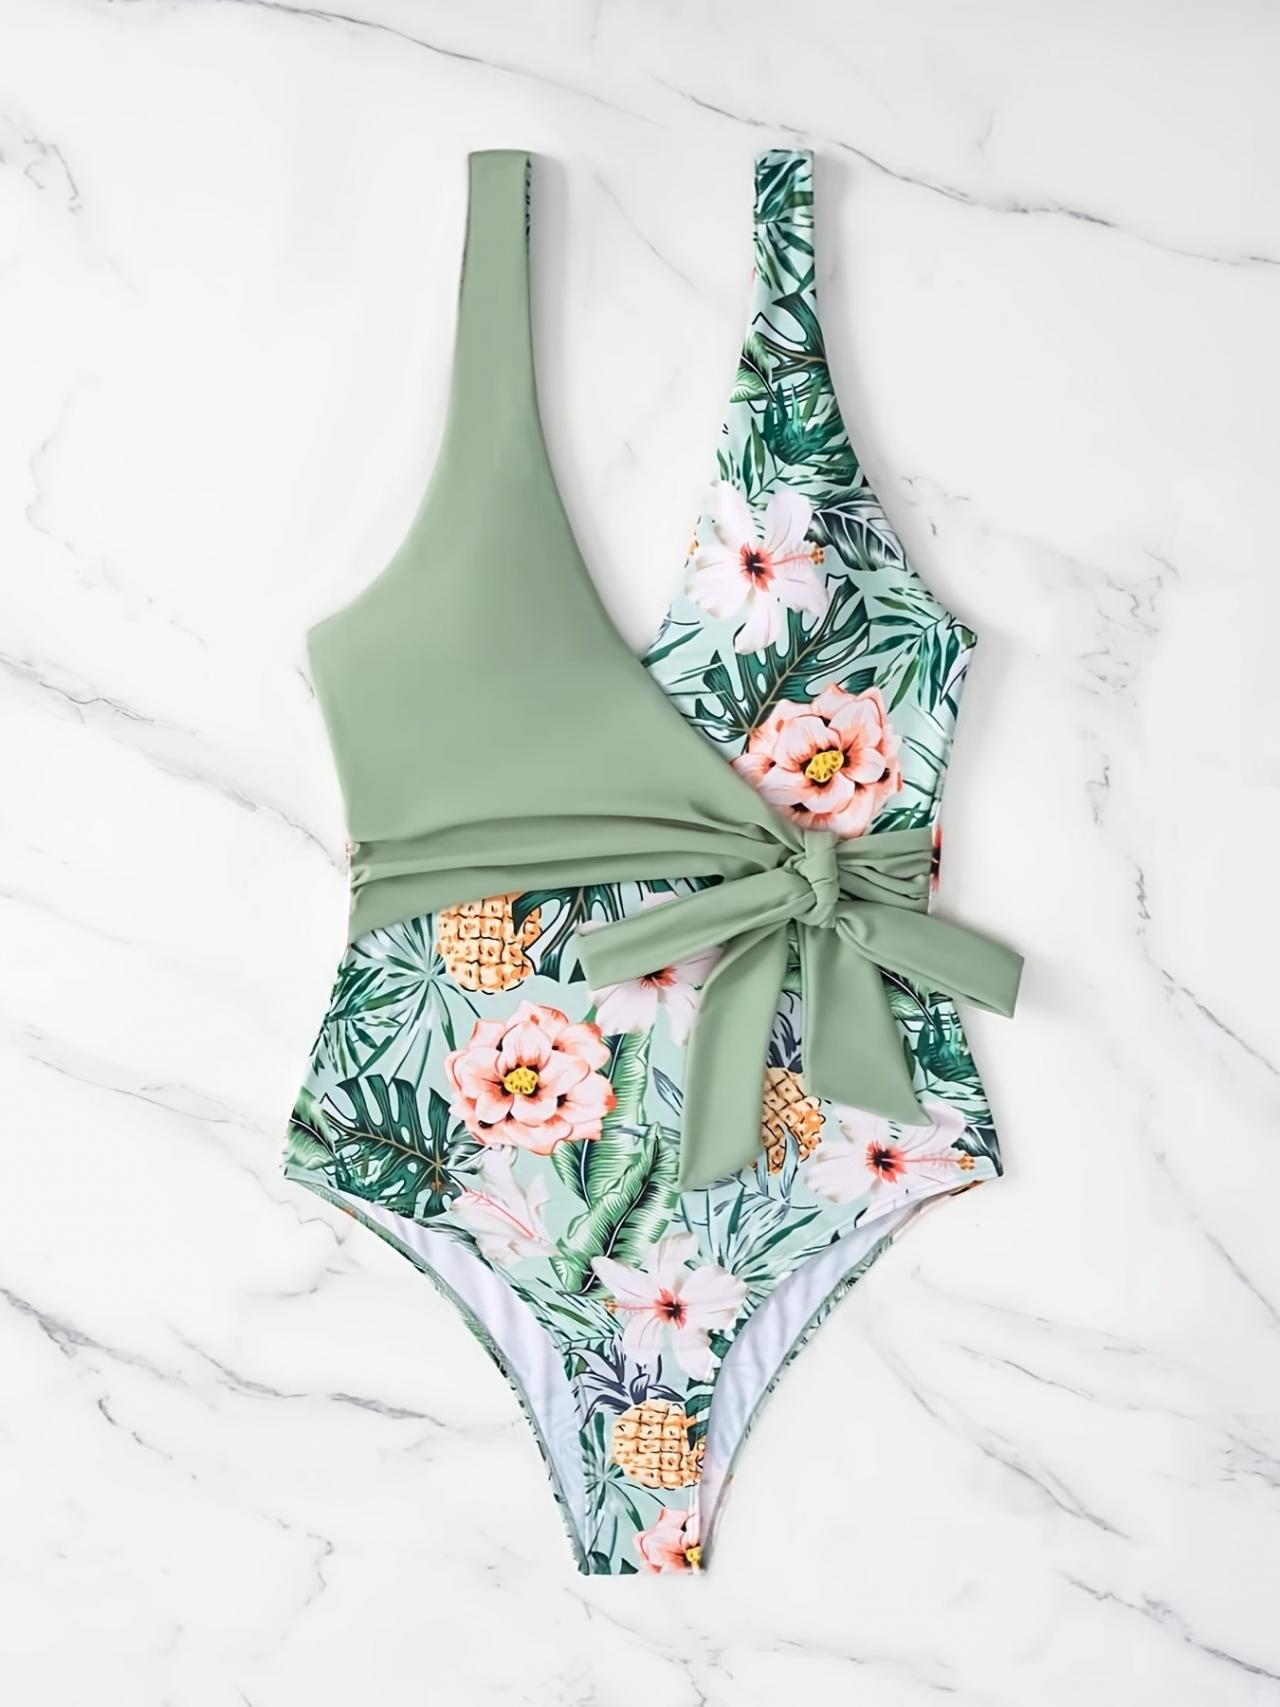 A One-piece Cross Strap Swimsuit With Sexy And Slimming Print Beach Vacation Bikini